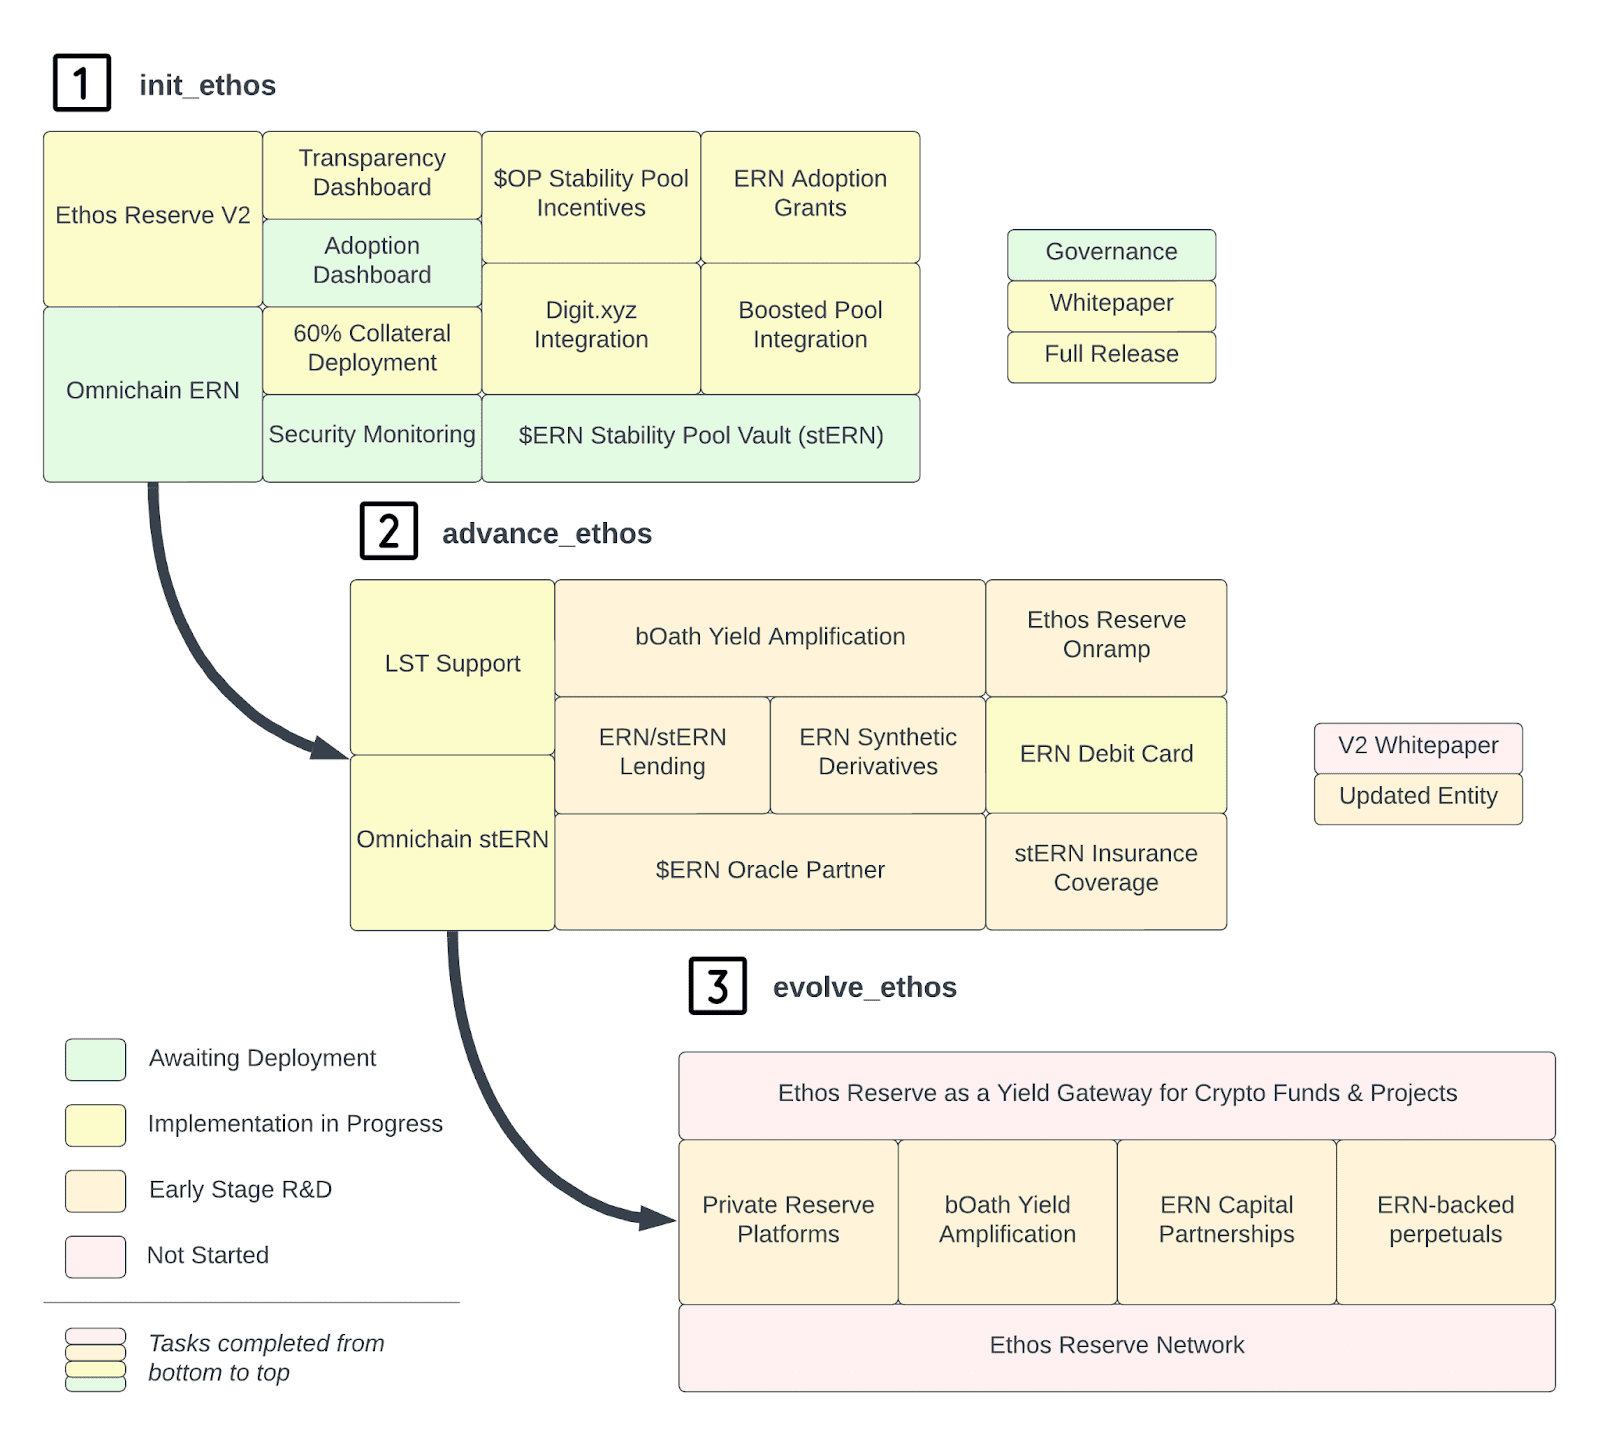 Phases of Ethos Reserve Roadmap